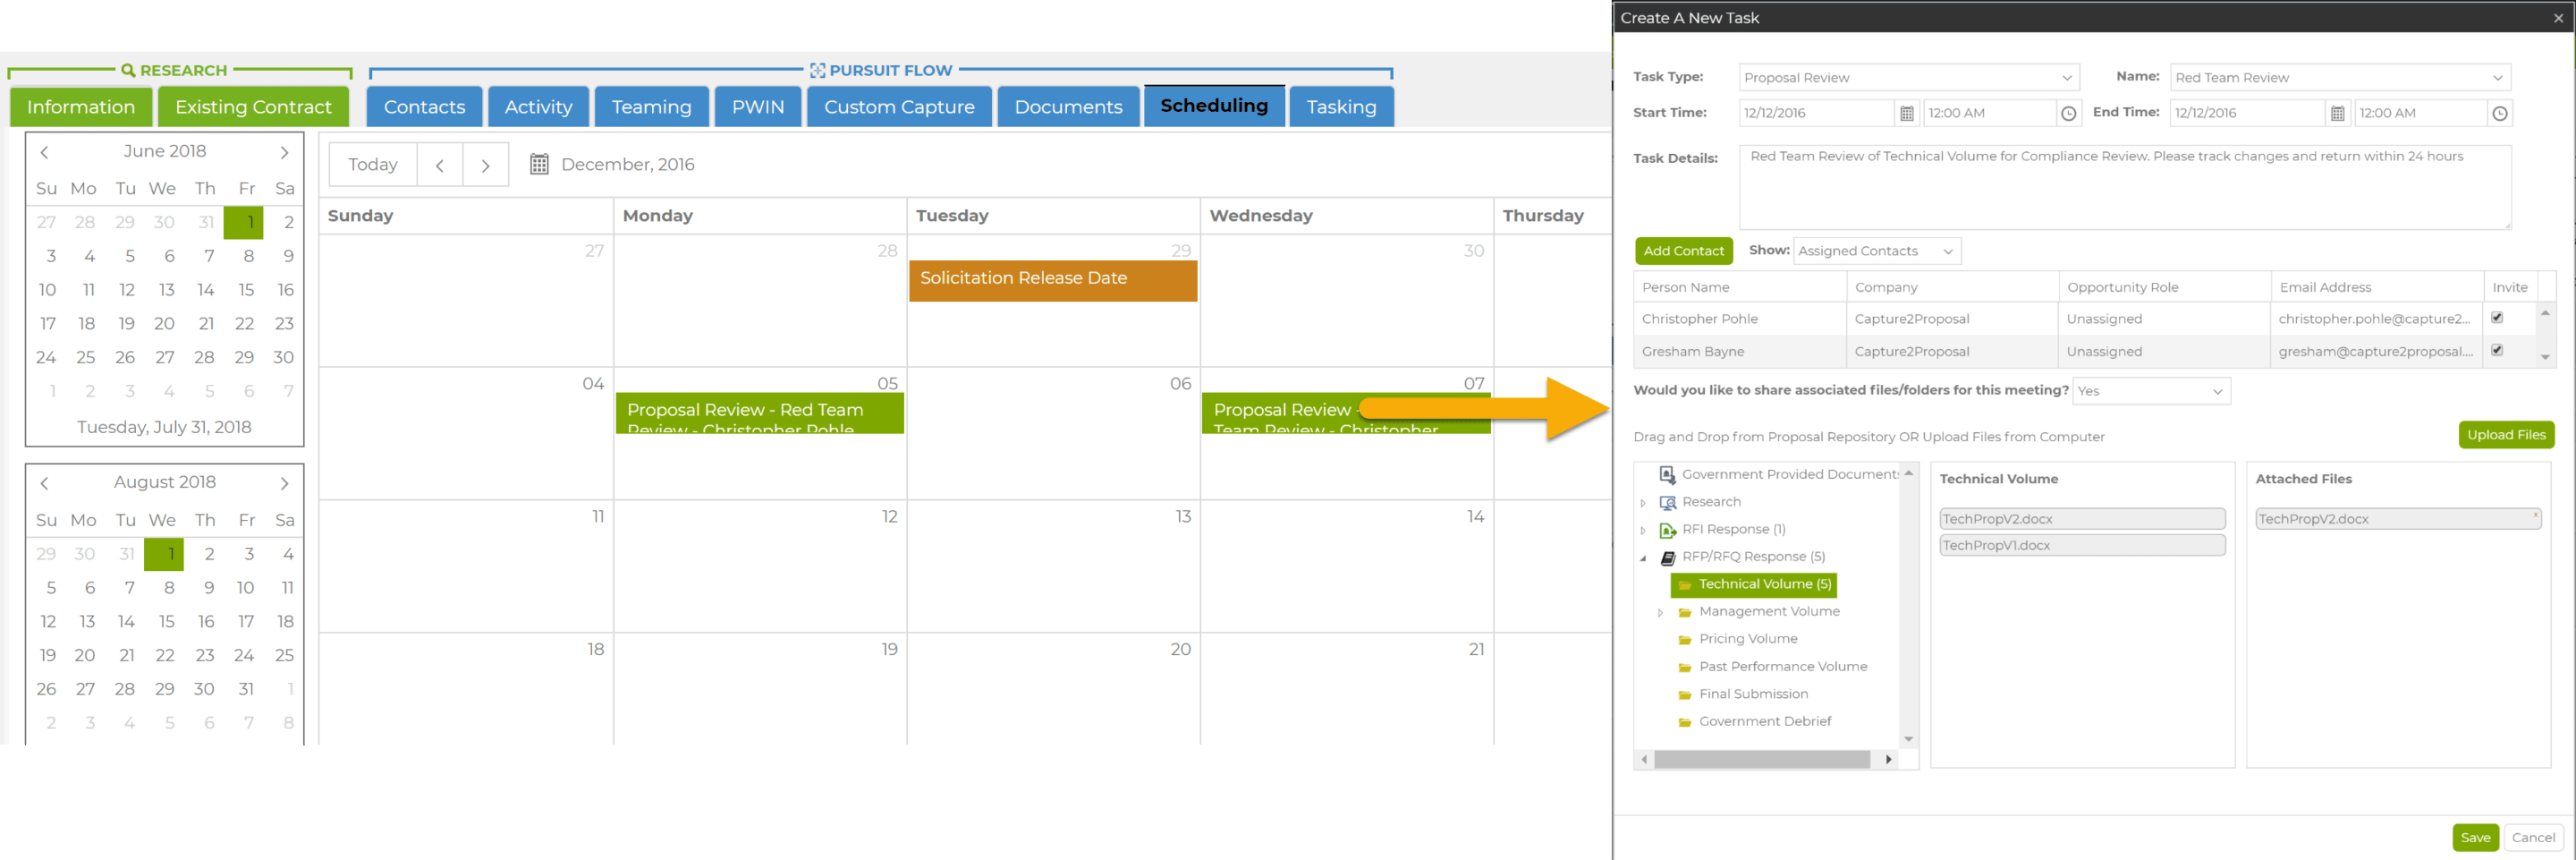 Creating a New Task in Capture2's Schedule Management Feature